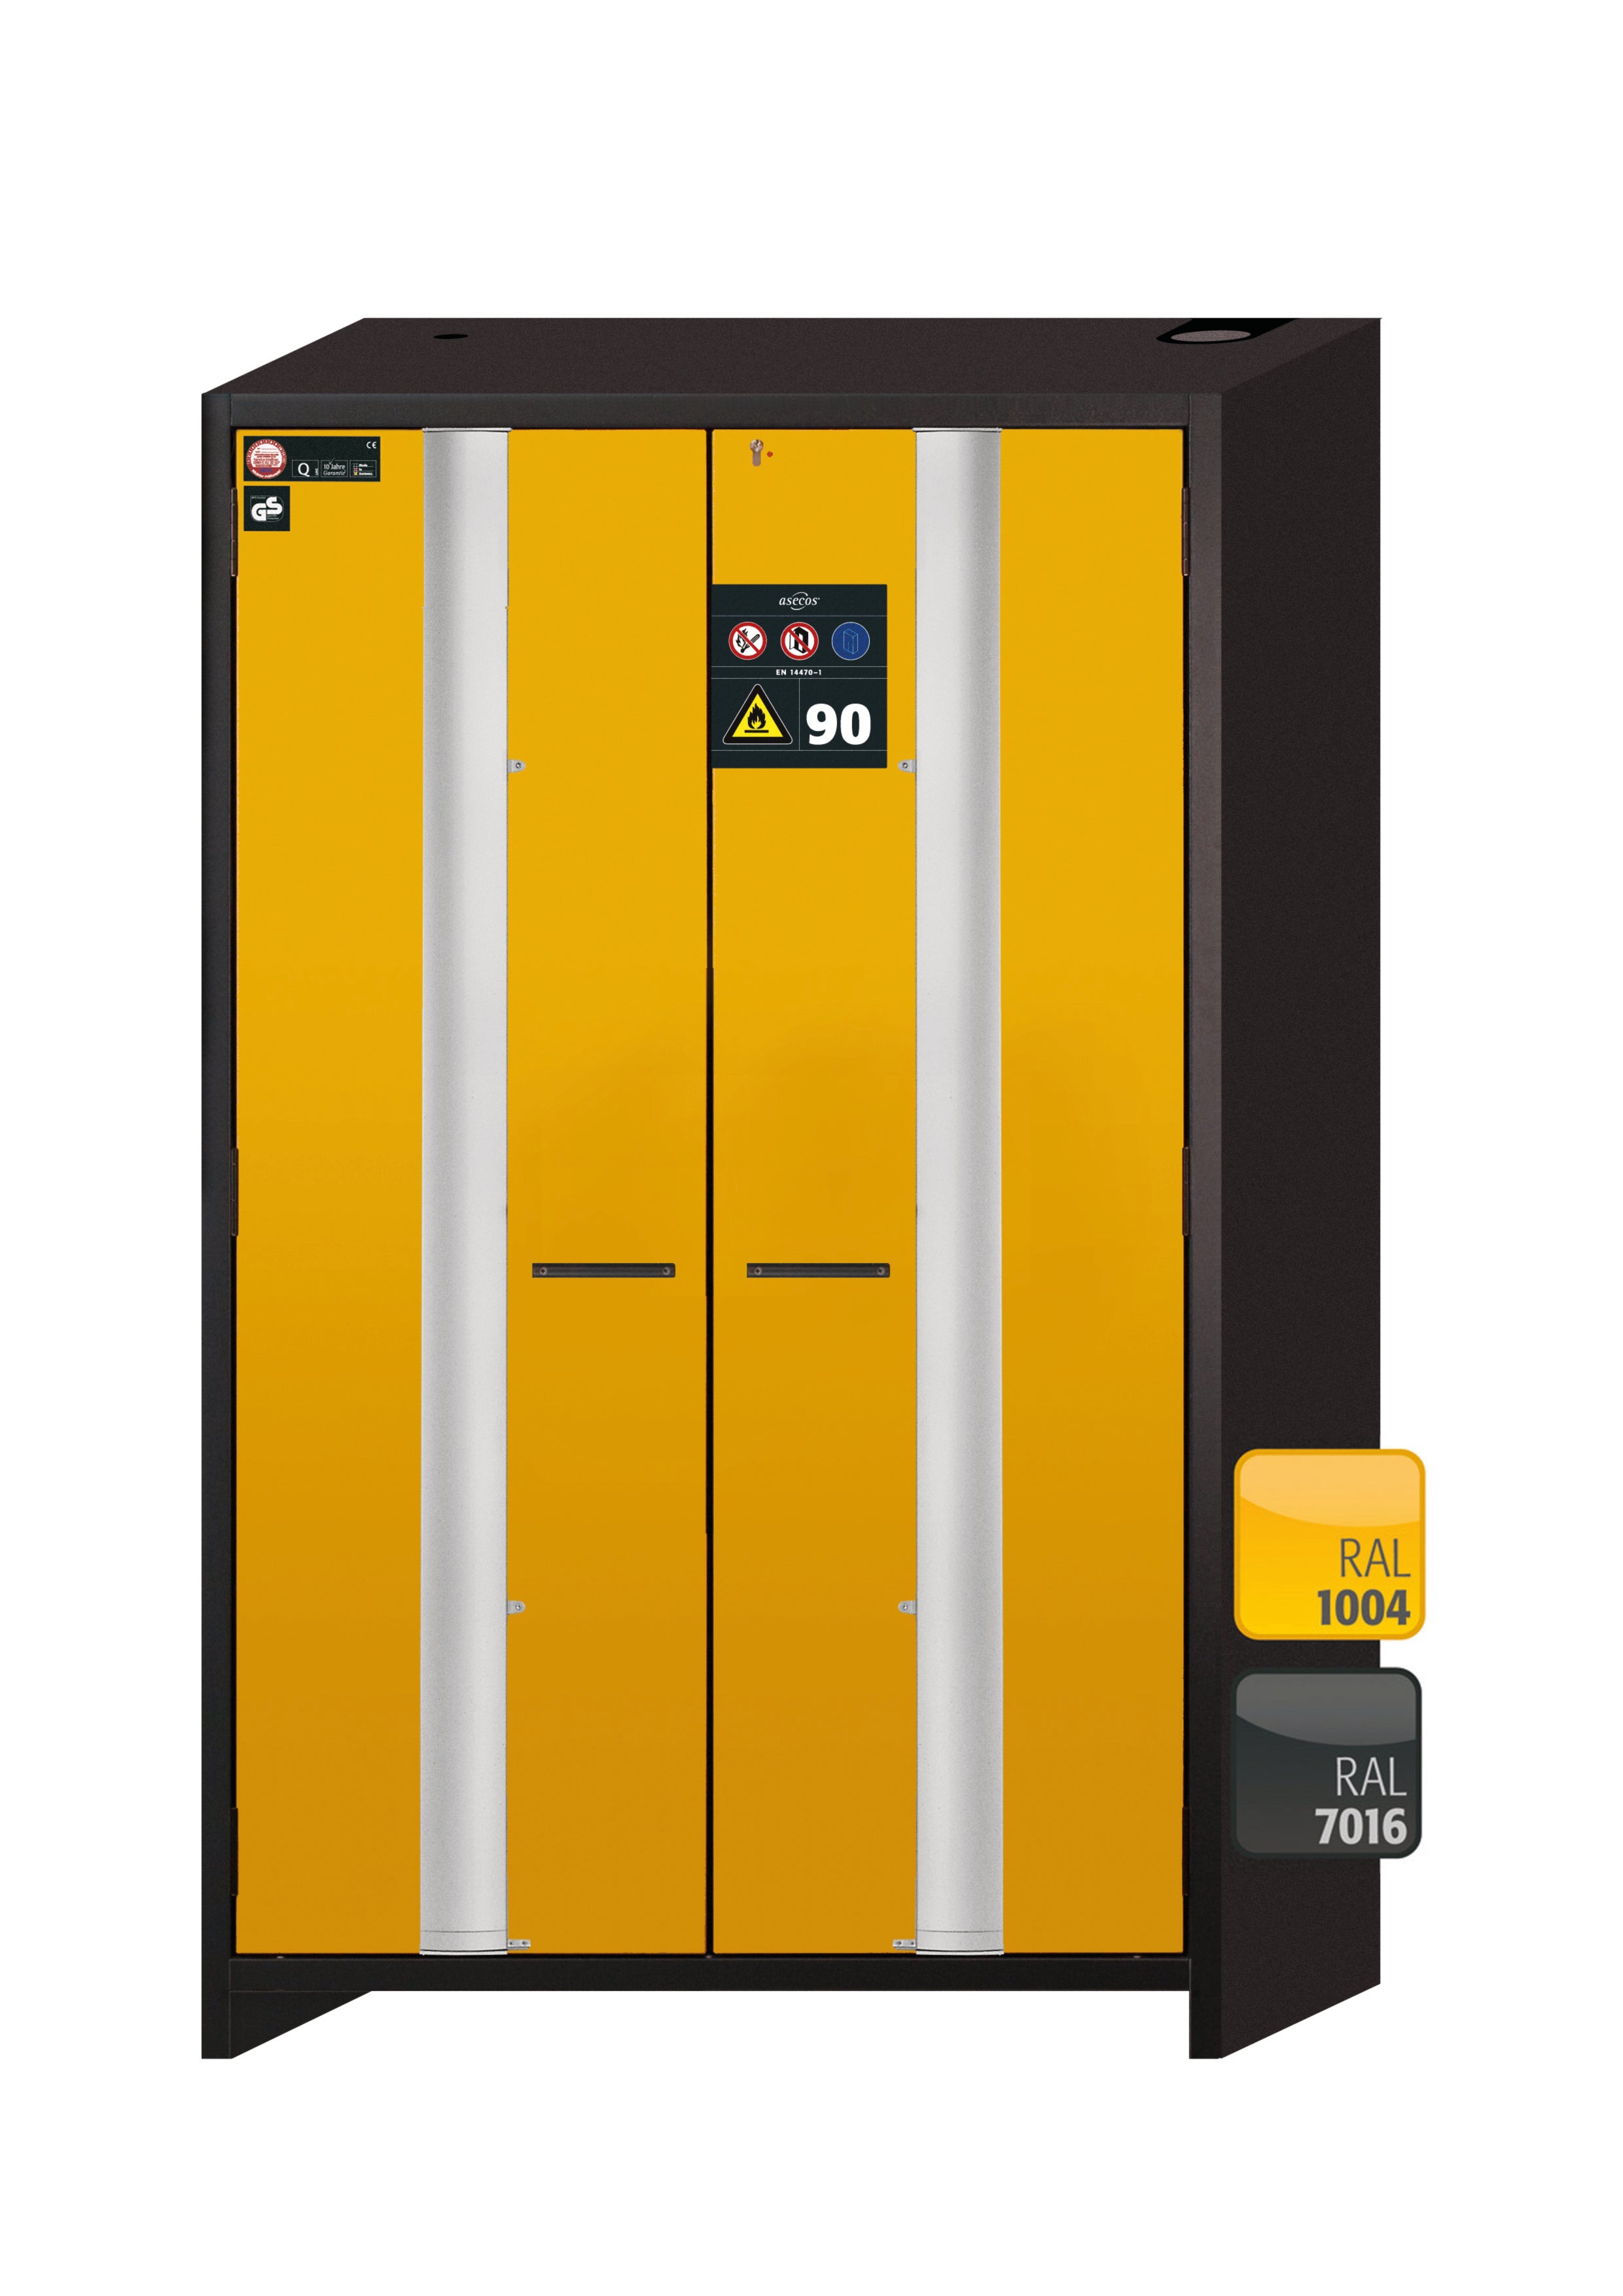 Type 90 safety cabinet Q-PHOENIX-90 model Q90.195.120.FD in safety yellow RAL 1004 with 5x standard pull-out tray (stainless steel 1.4301)